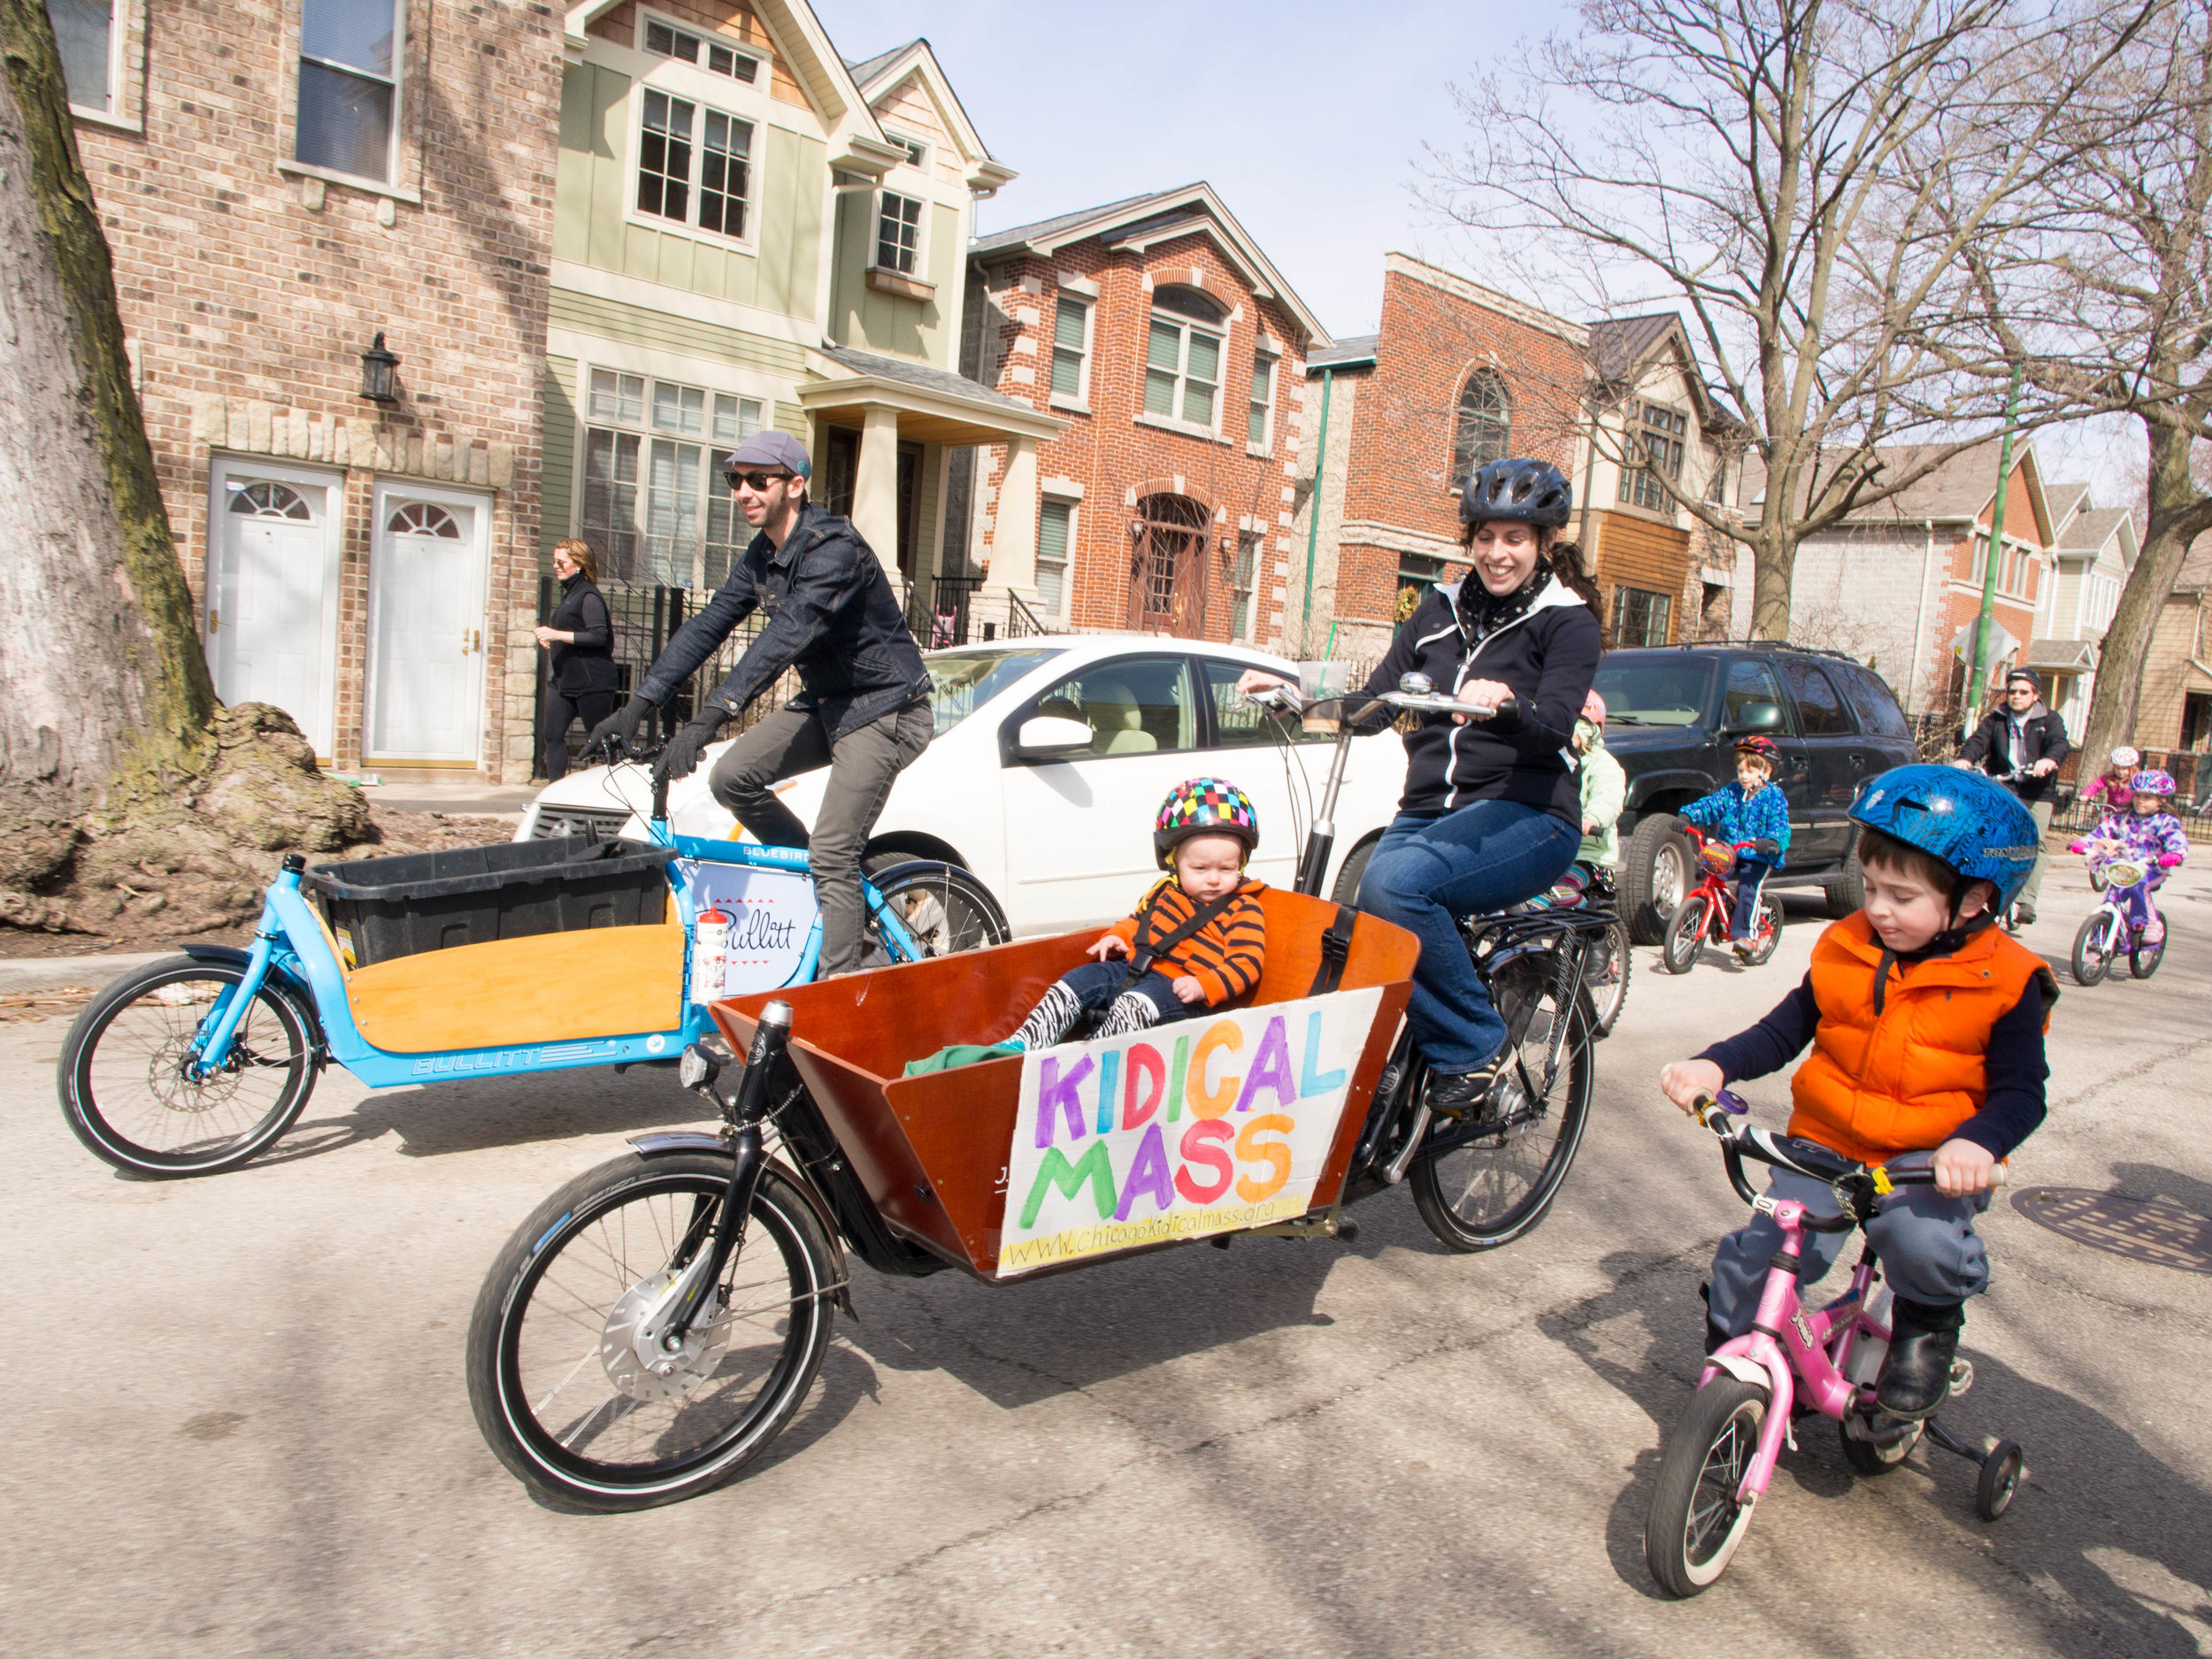  Kidical mass   Let's Ride!    Learn more  